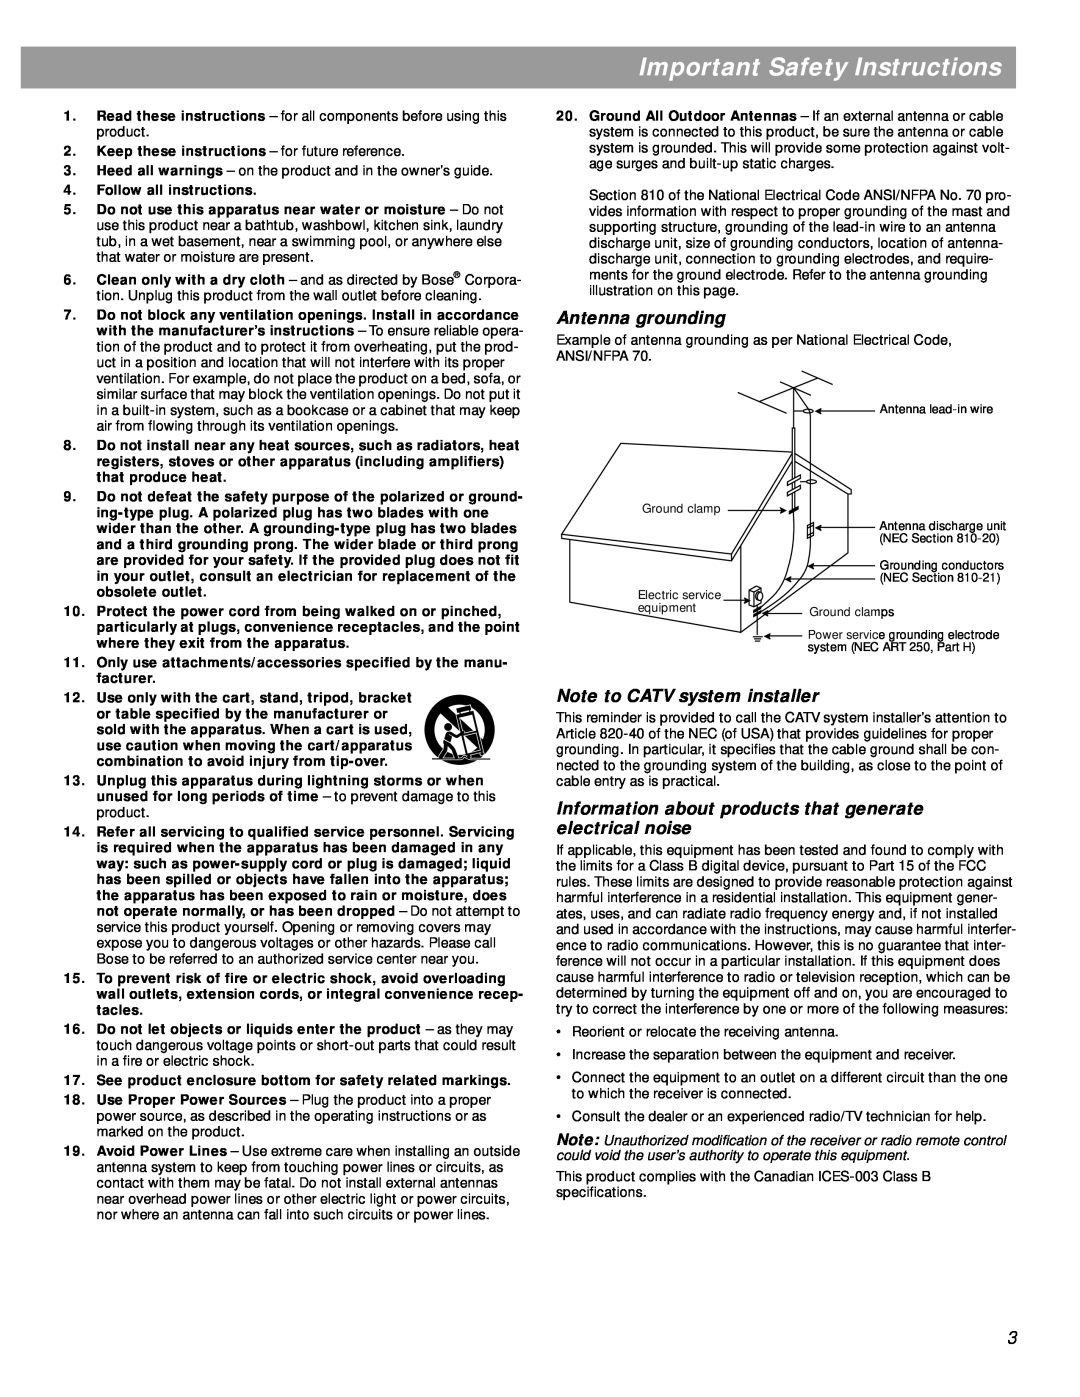 Bose SA-3 manual Important Safety Instructions, Antenna grounding, Note to CATV system installer 